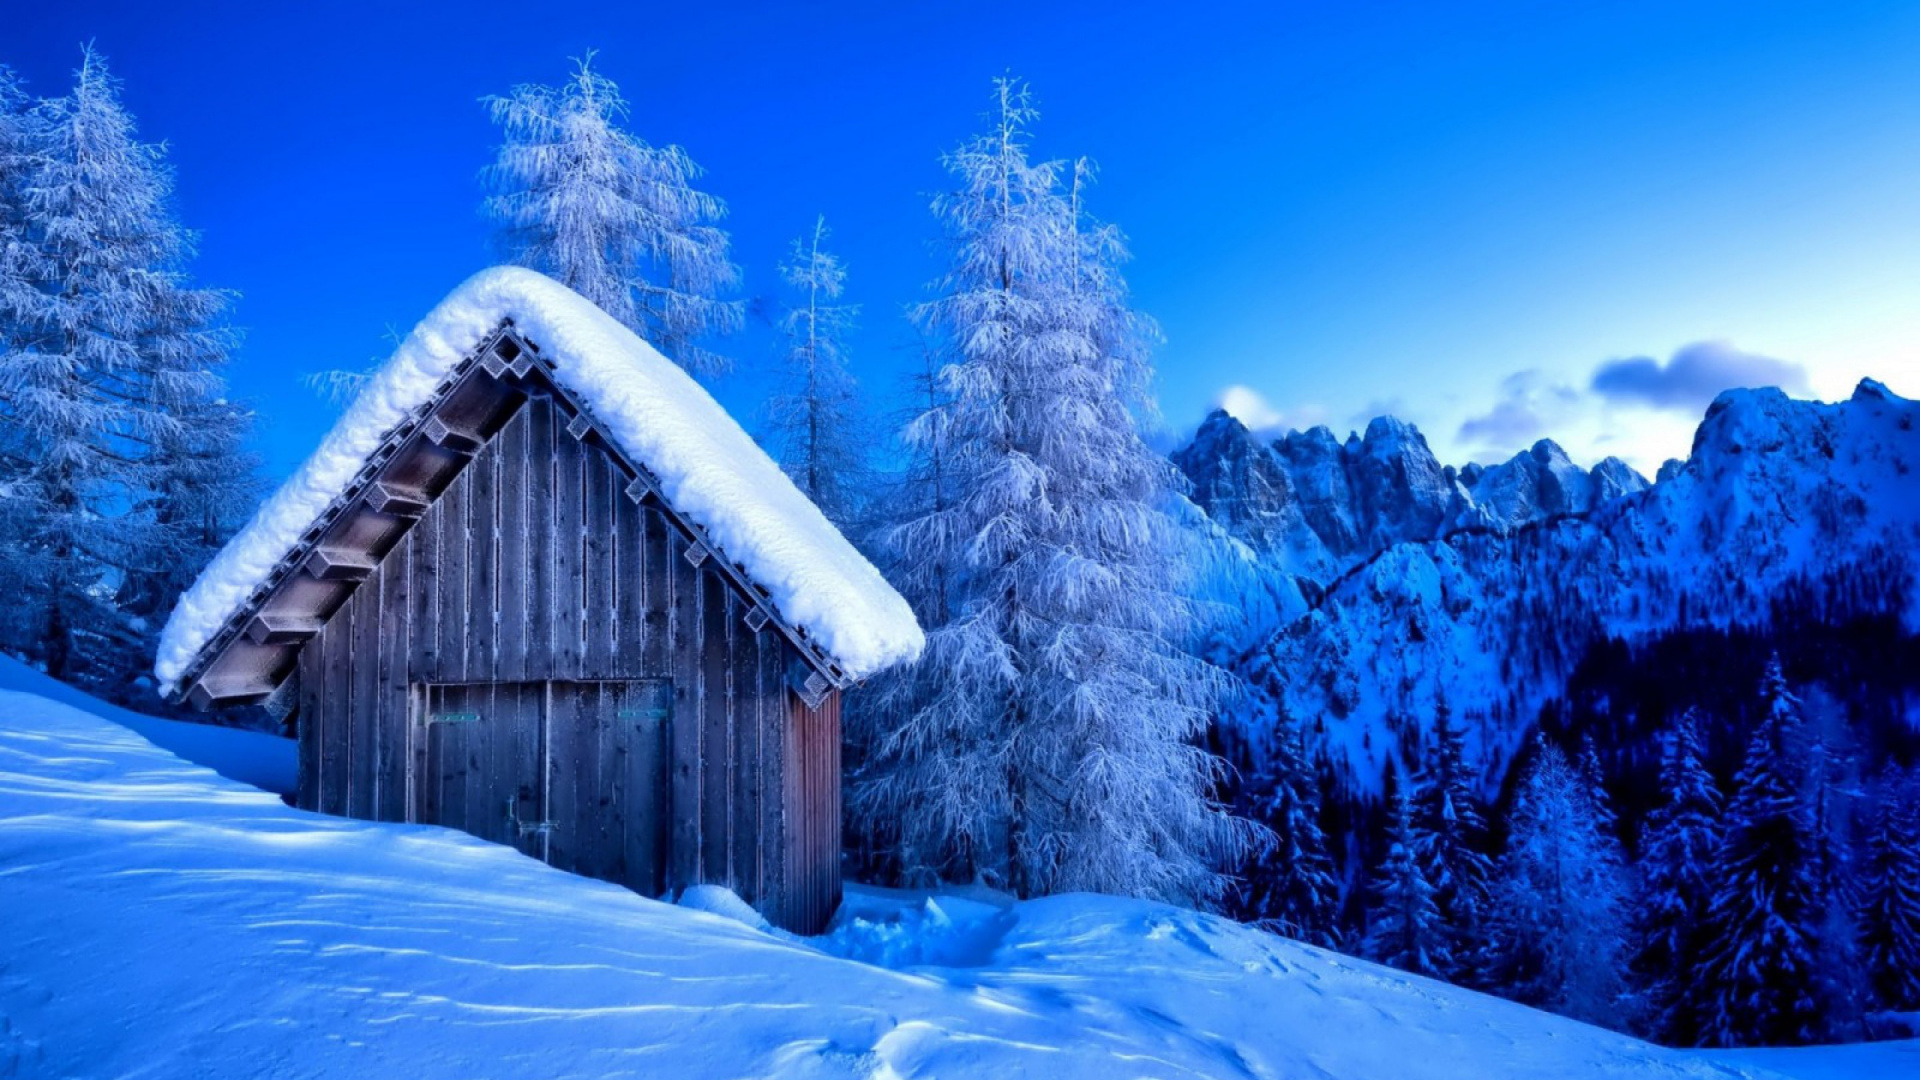 Brown Wooden House Near Snow Covered Pine Trees Under Blue Sky During Daytime. Wallpaper in 1920x1080 Resolution